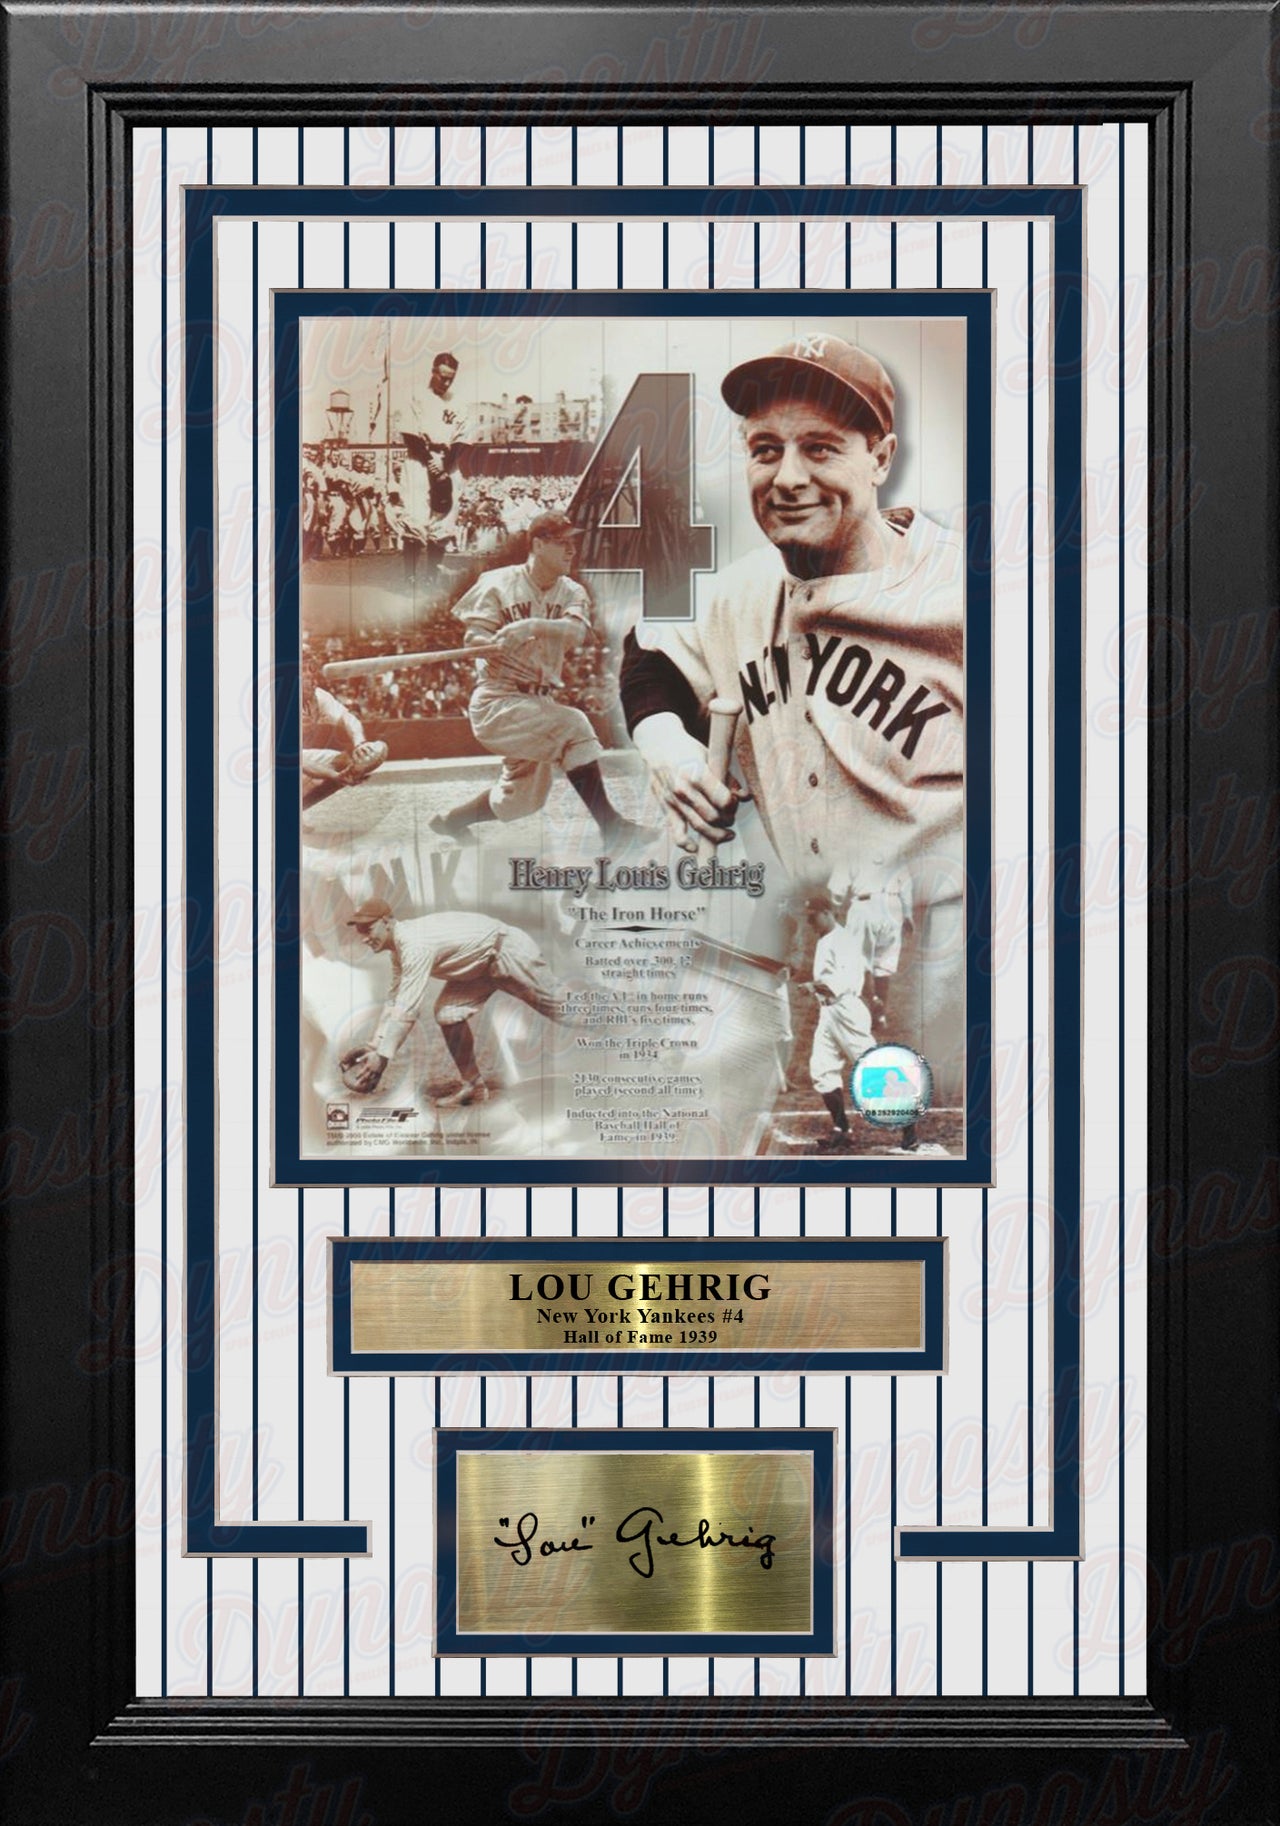 Lou Gehrig New York Yankees 8x10 Framed Baseball Collage Photo with Engraved Autograph - Dynasty Sports & Framing 